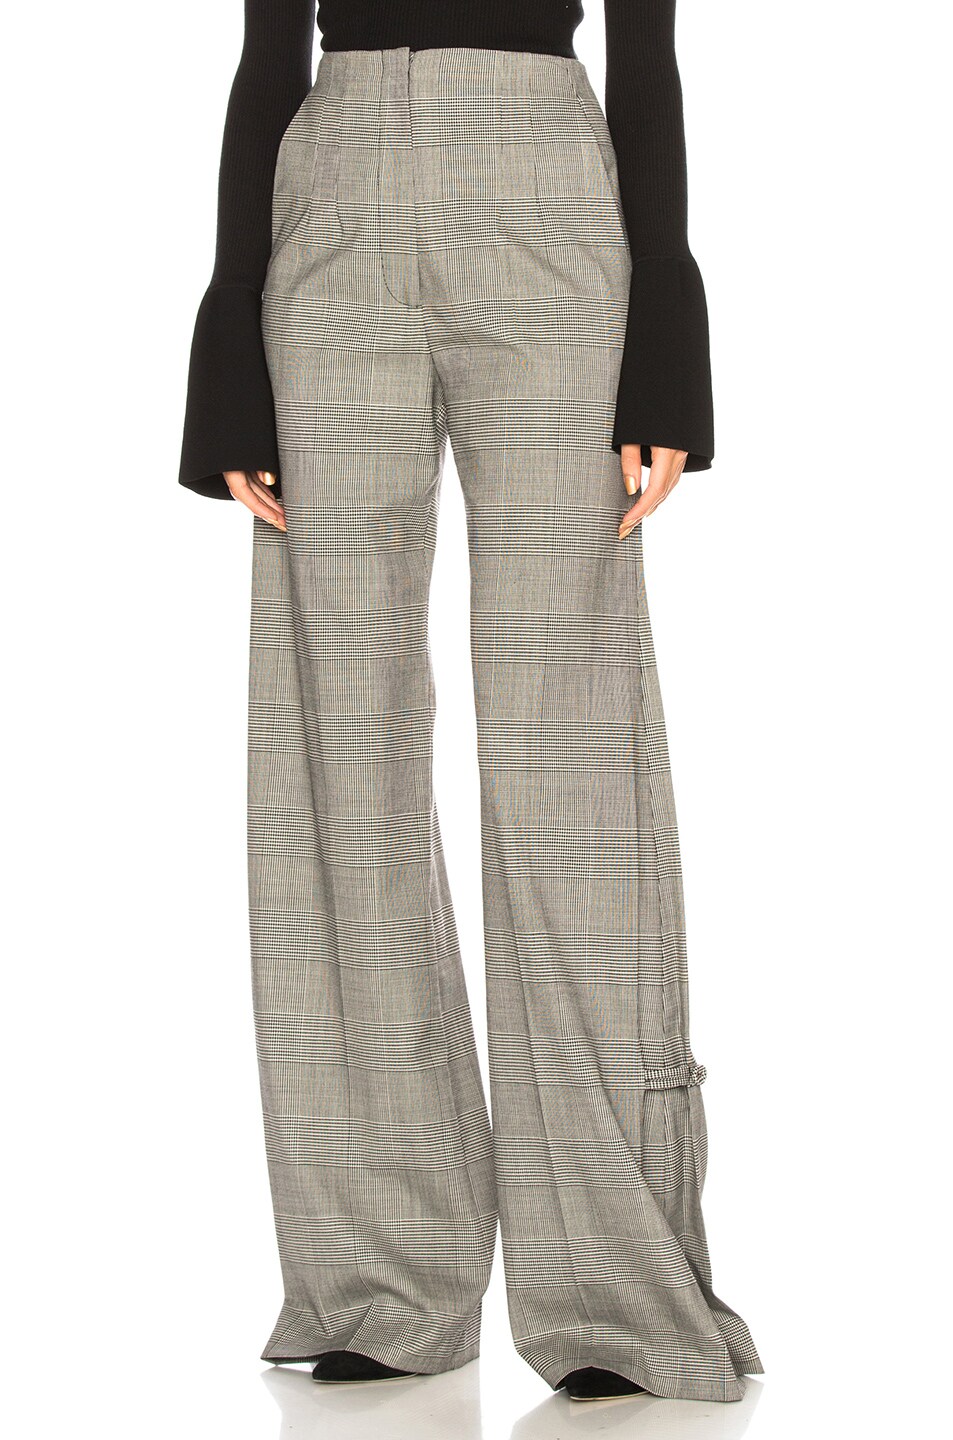 Image 1 of Proenza Schouler Plaid Wool Wide Leg Trousers in Black & Off White Plaid